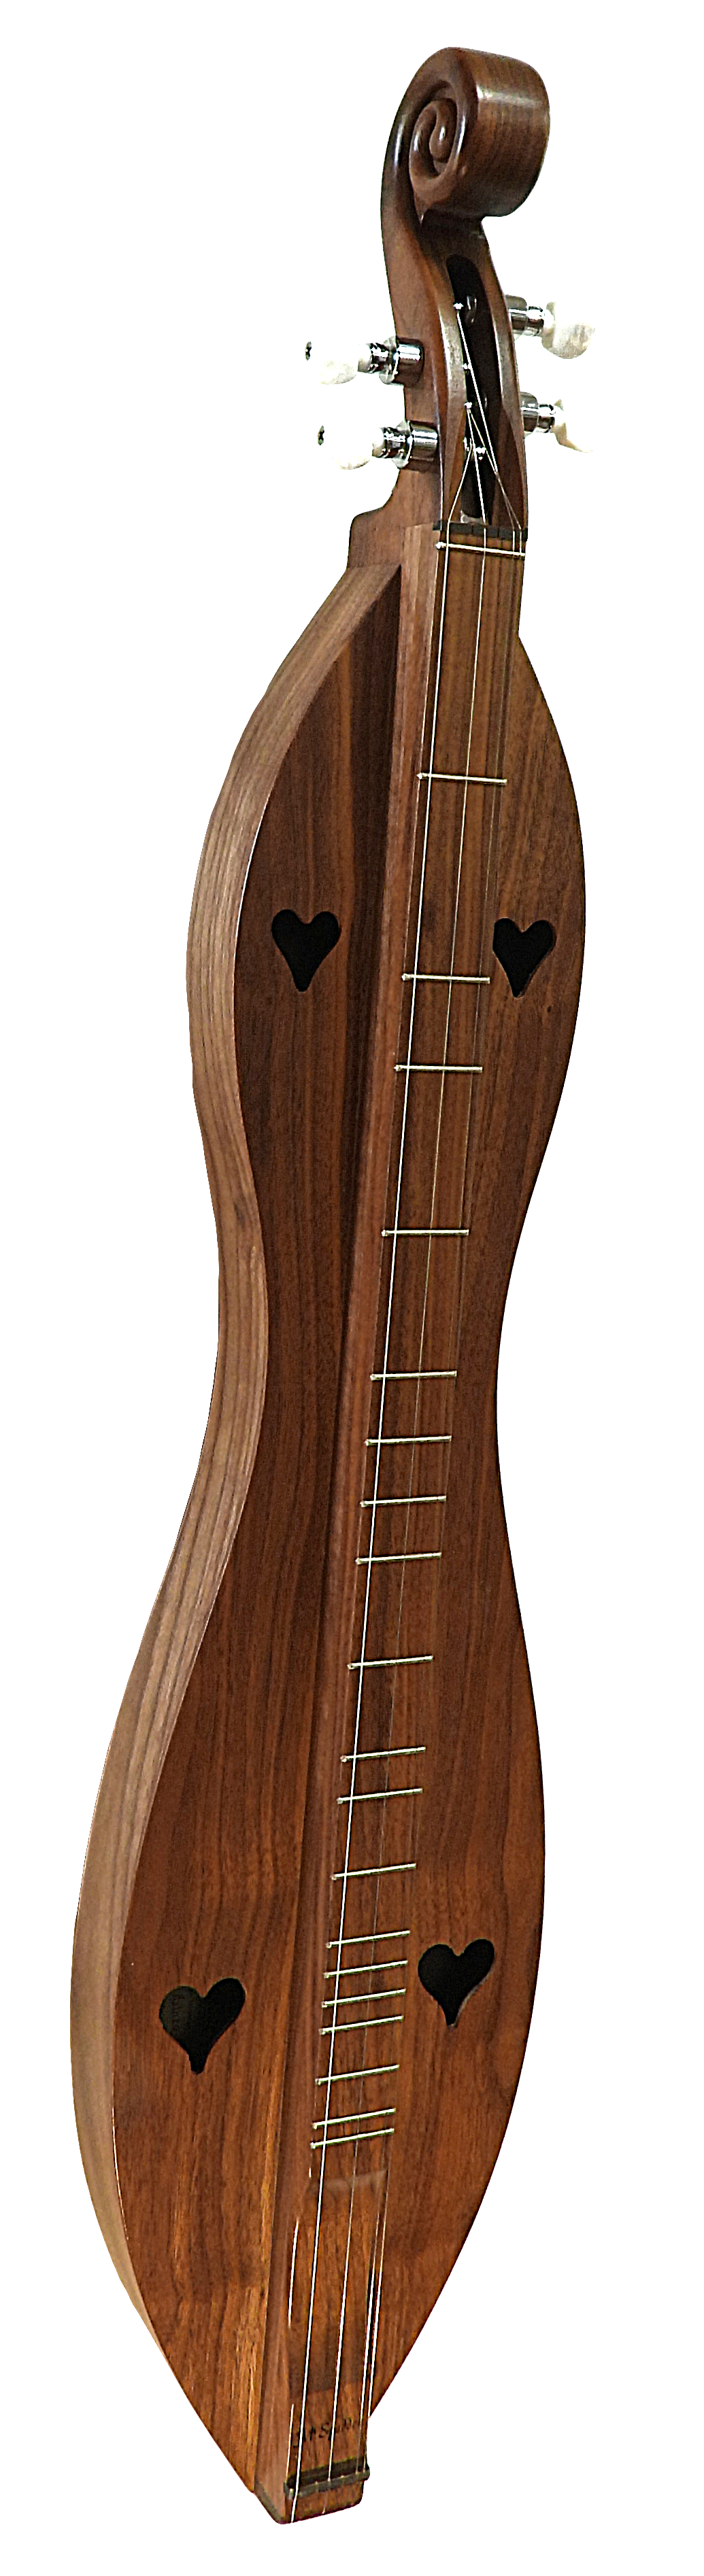 A 4 String, Scroll head, Hourglass with Walnut back, sides and top acoustic guitar on a white background.